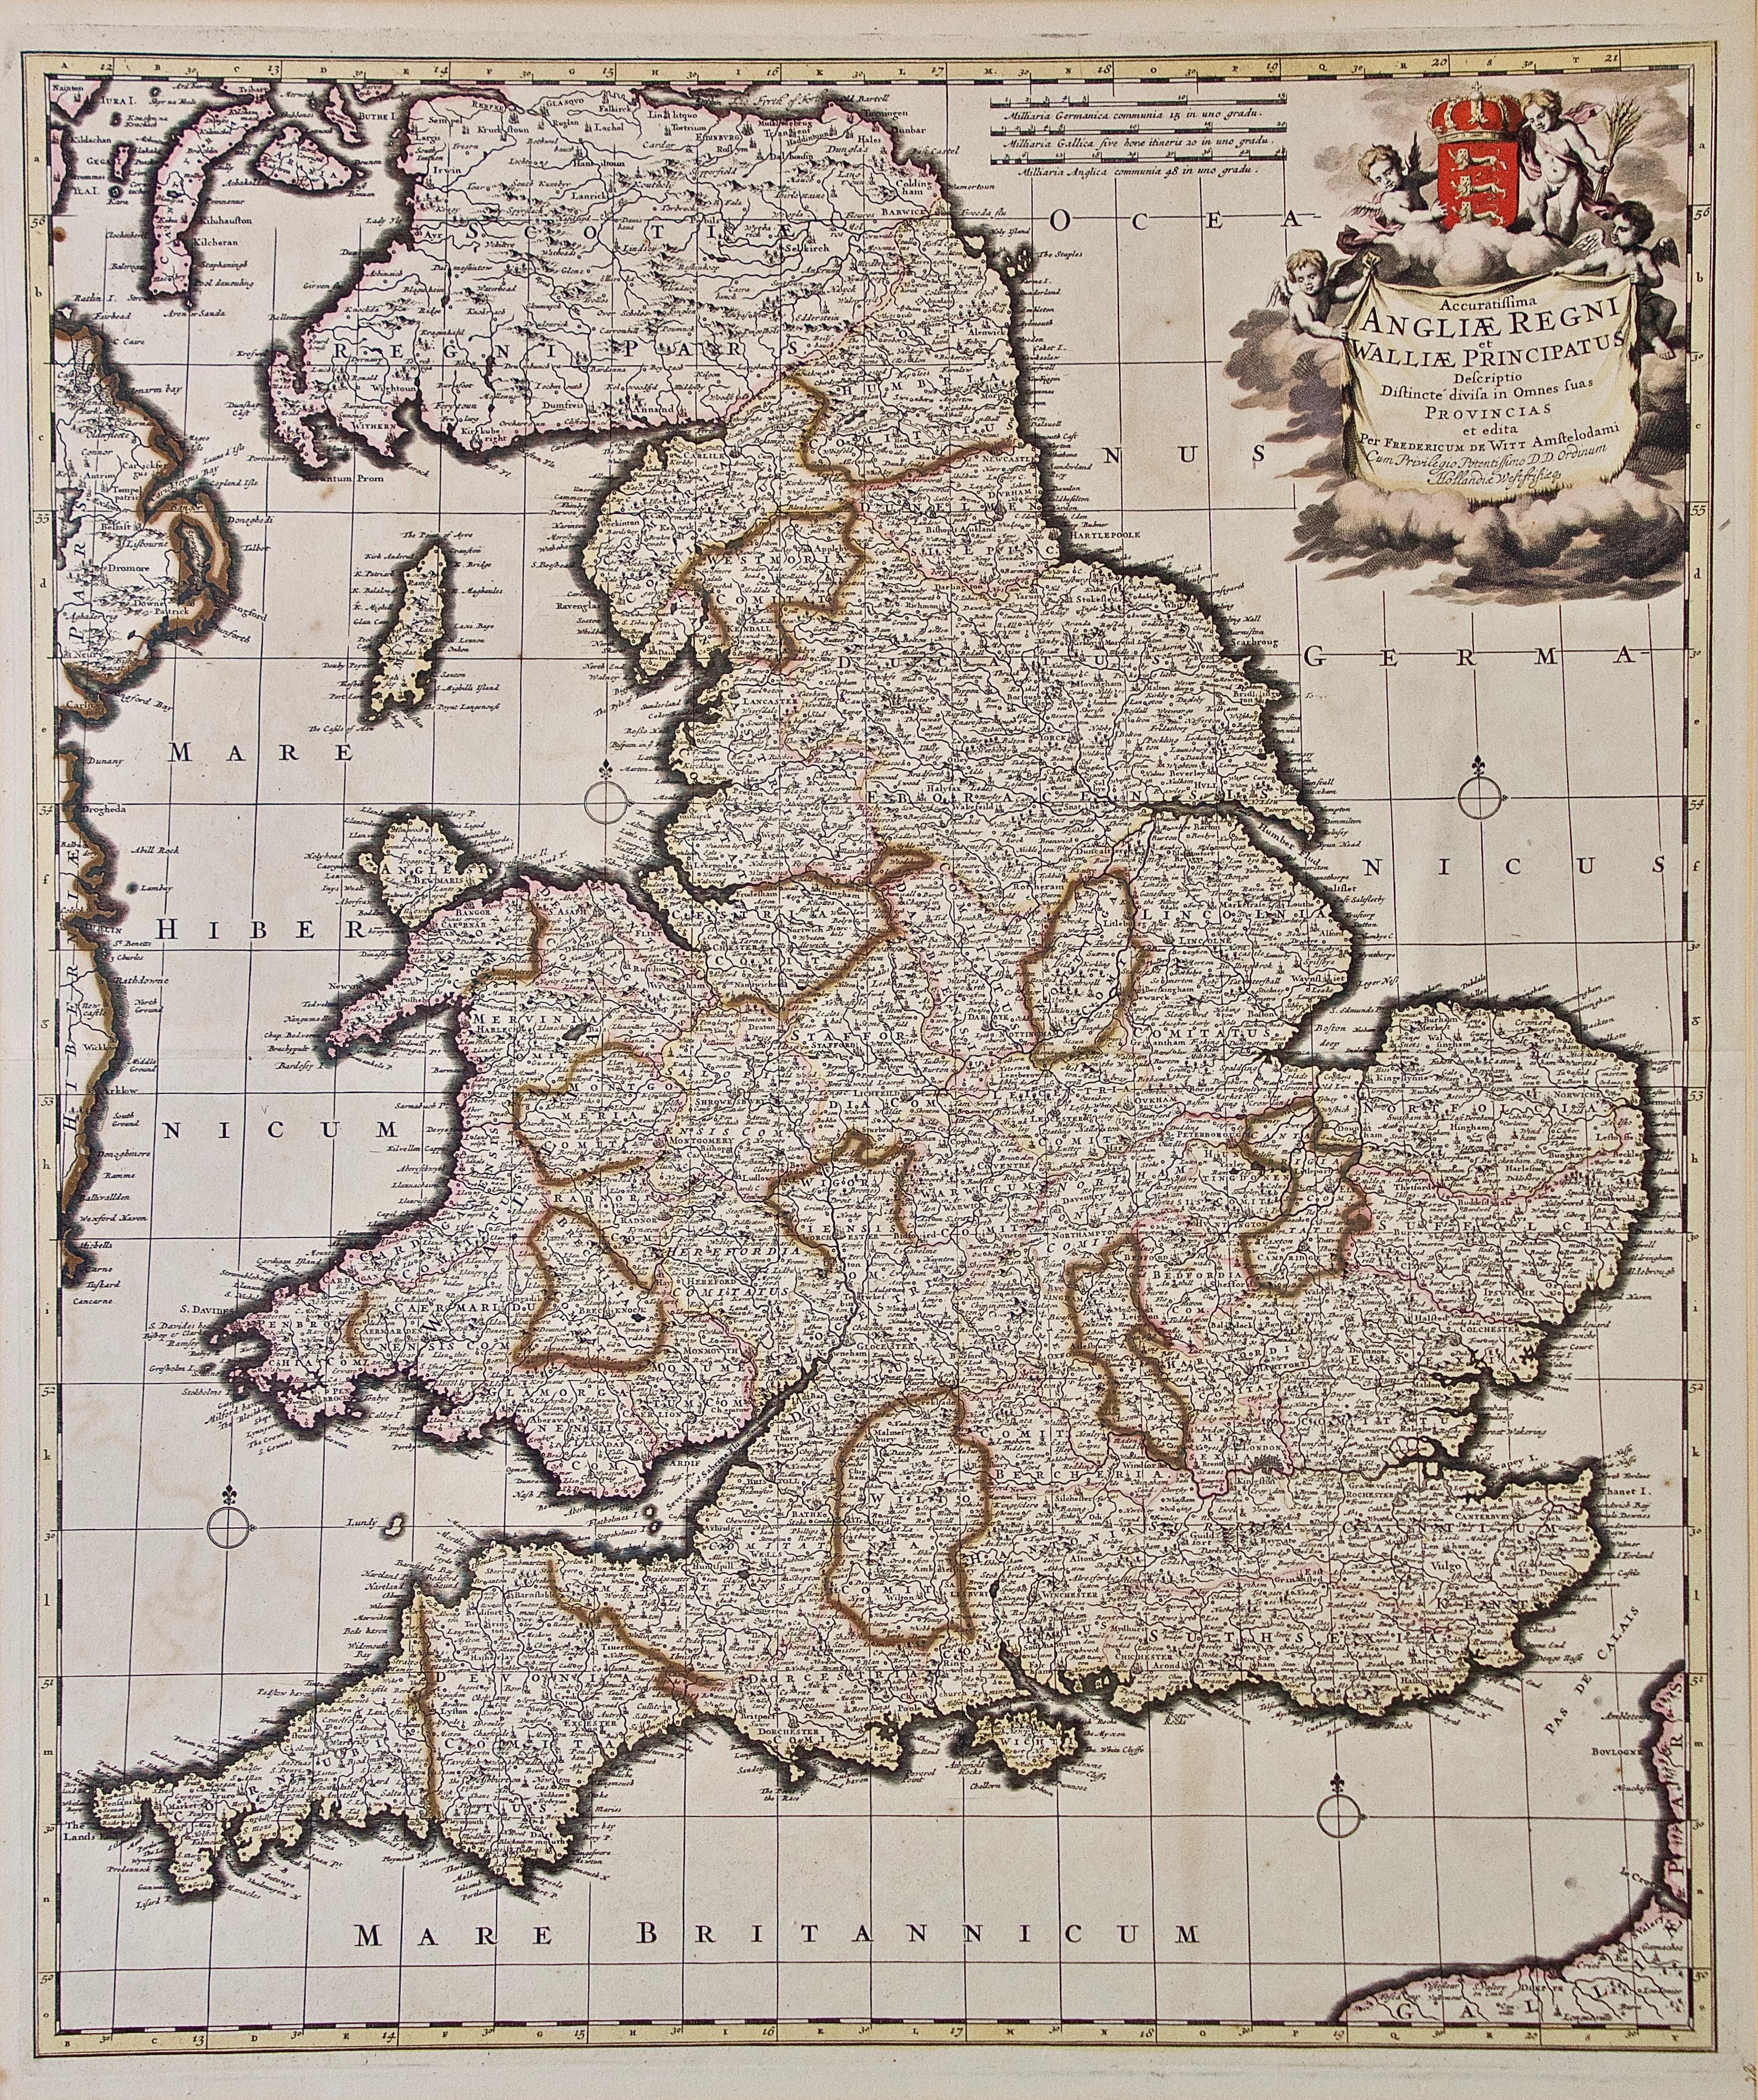 England and the British Isles: A Large 17th Century Hand-colored Map by de Wit - Print by Frederick de Wit